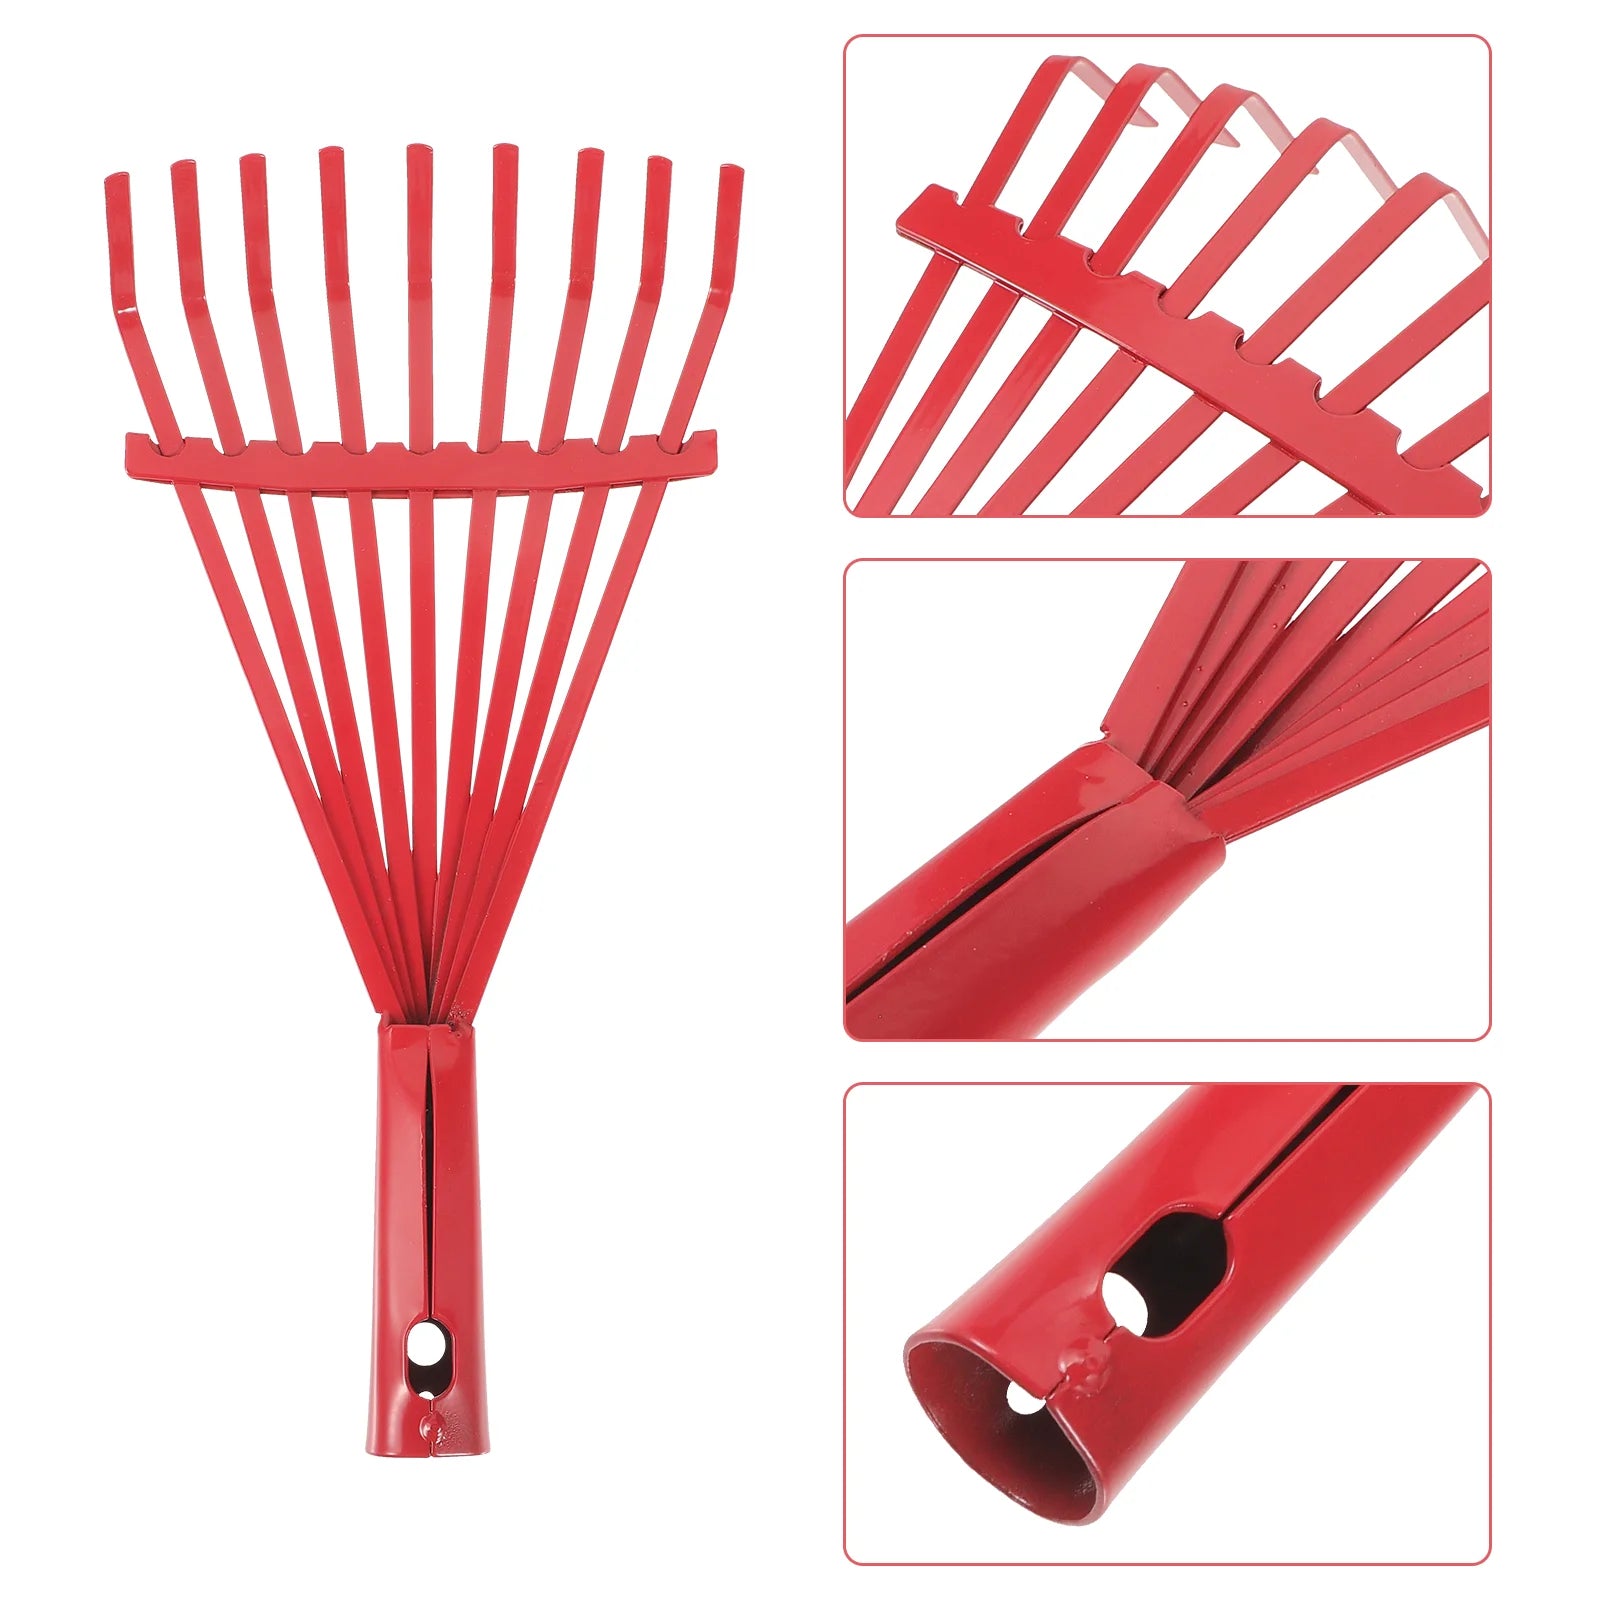 Cleaning Tool Gardening Supplies Hand Cultivator Farm Tools Rake Steel Without Handle Rakes Leaves Soil Loosening